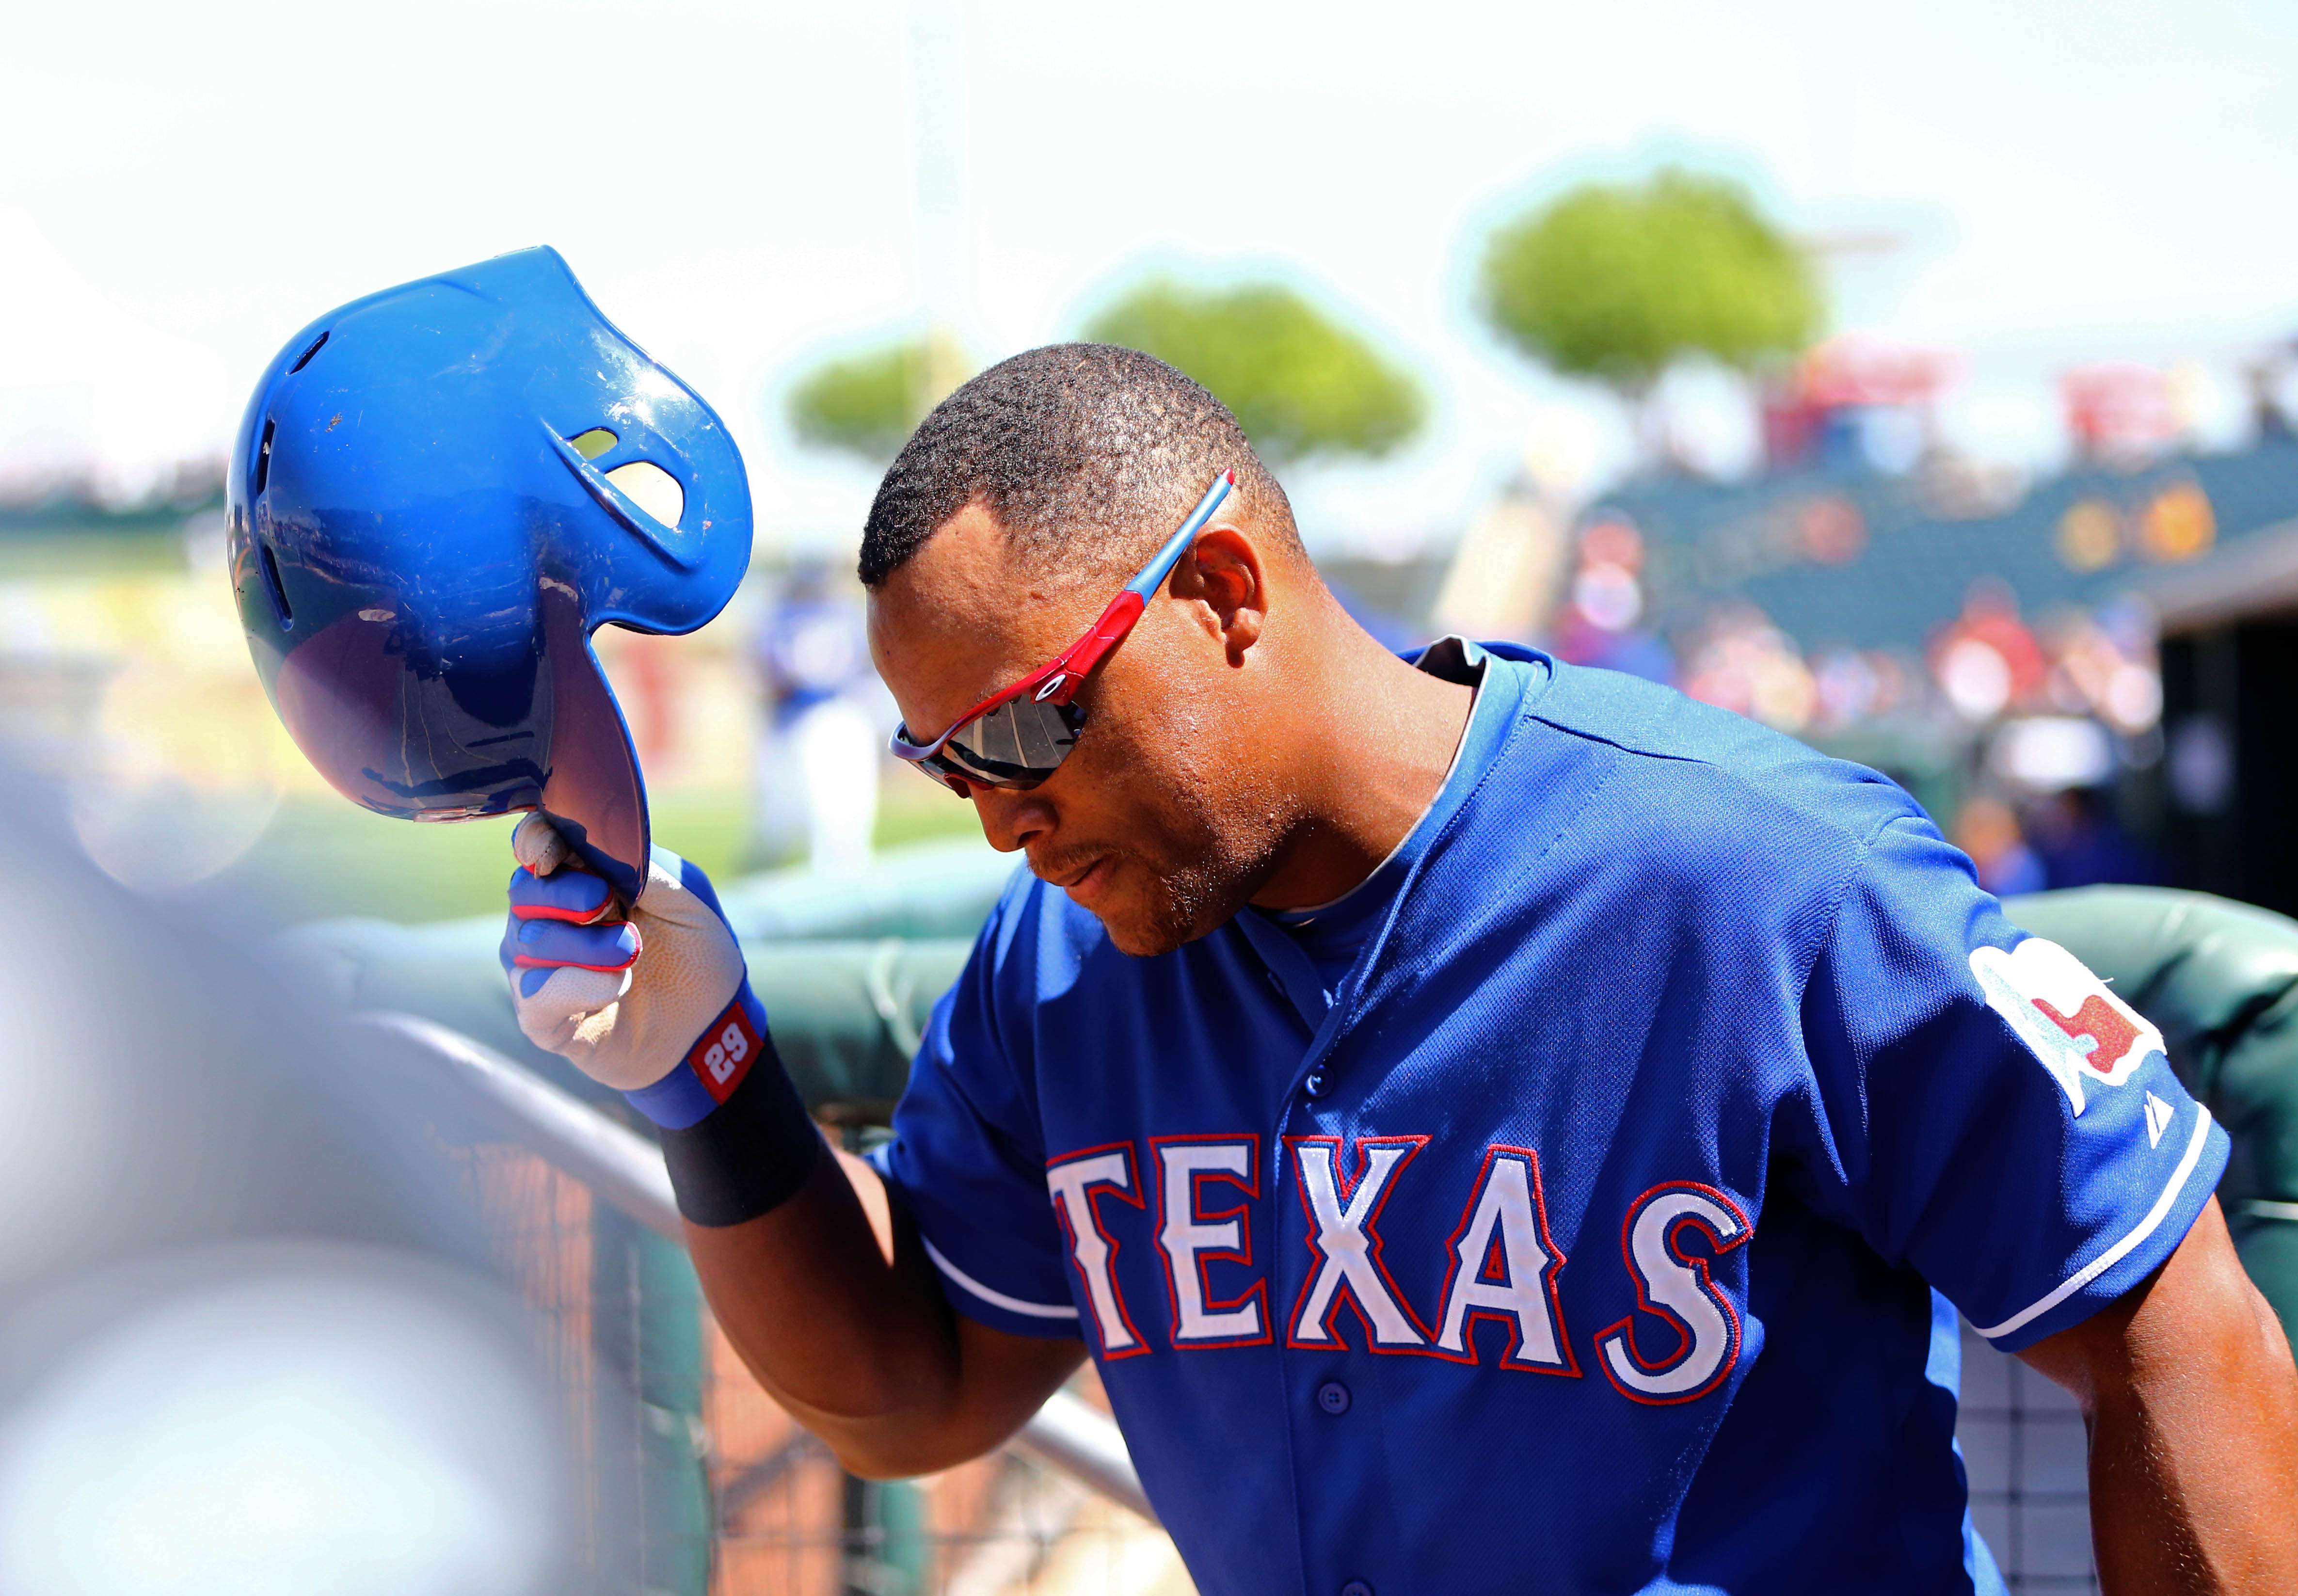 Just because Adrian Beltre reached 3,000 hits doesn't mean you can touch  his head